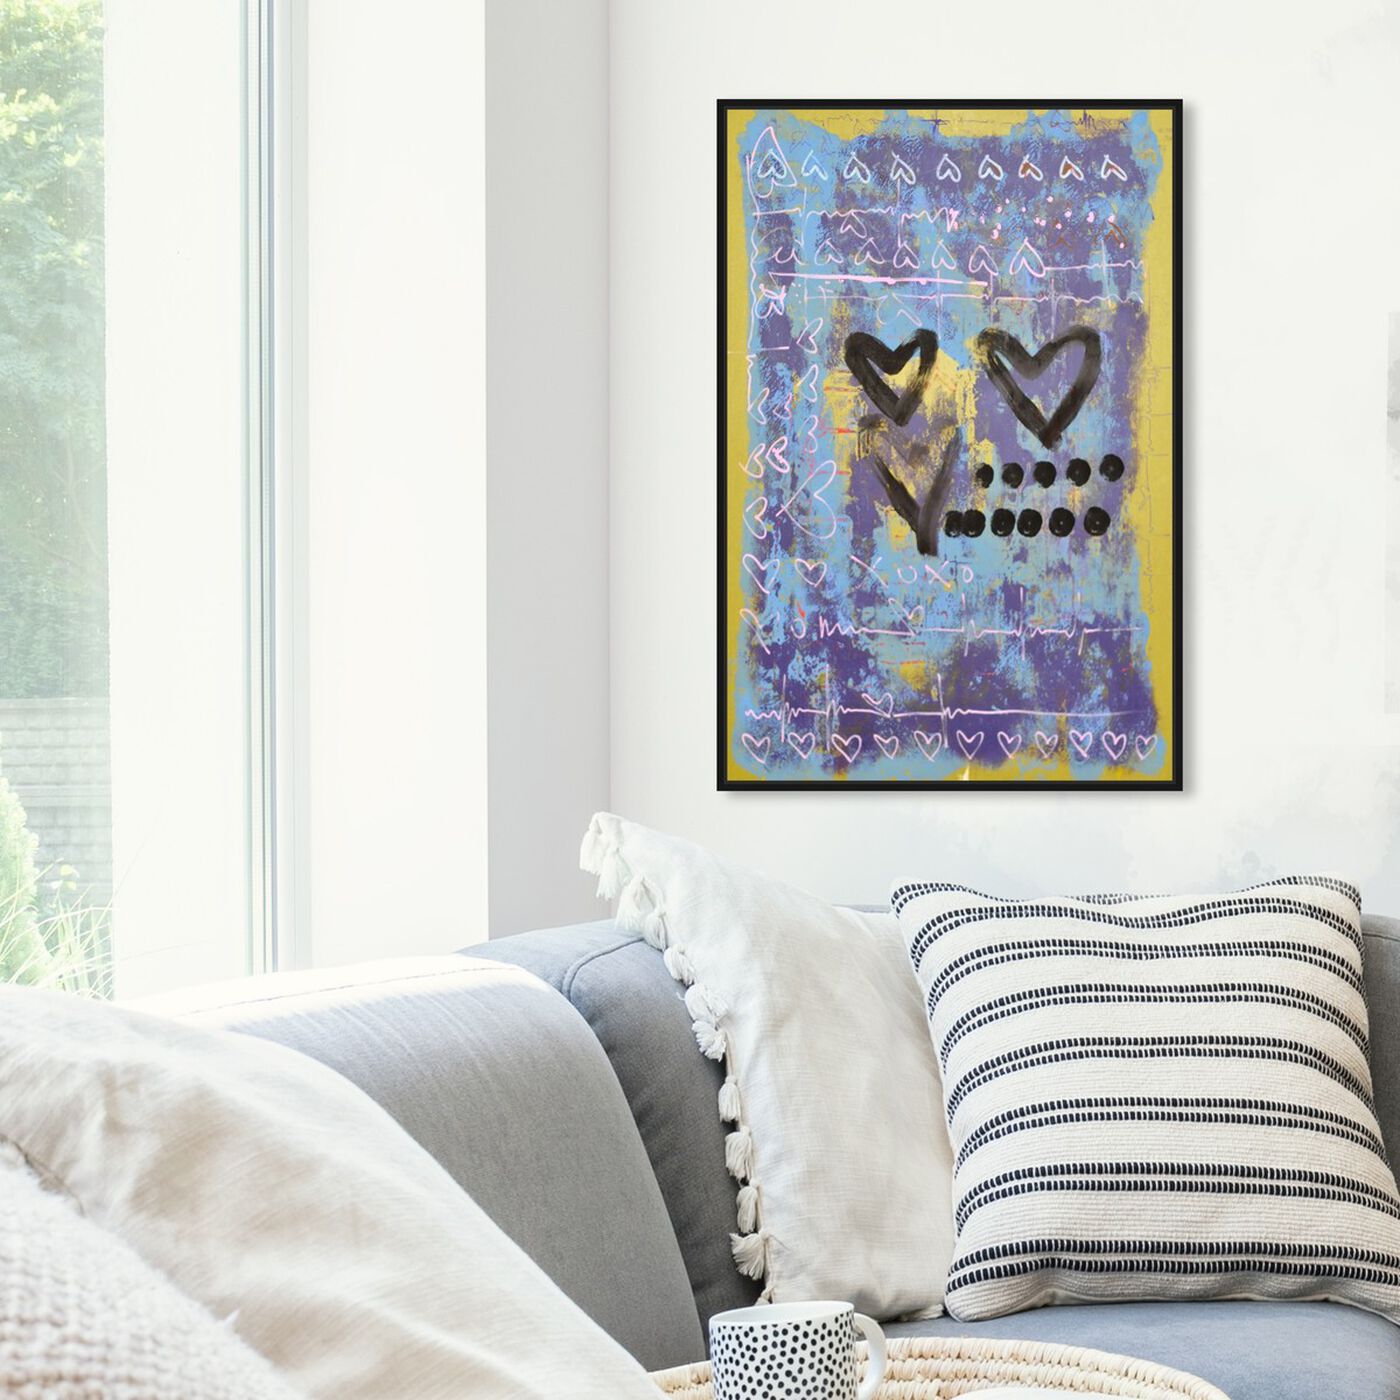 Hanging view of XoXo by Tiago Magro featuring abstract and paint art.